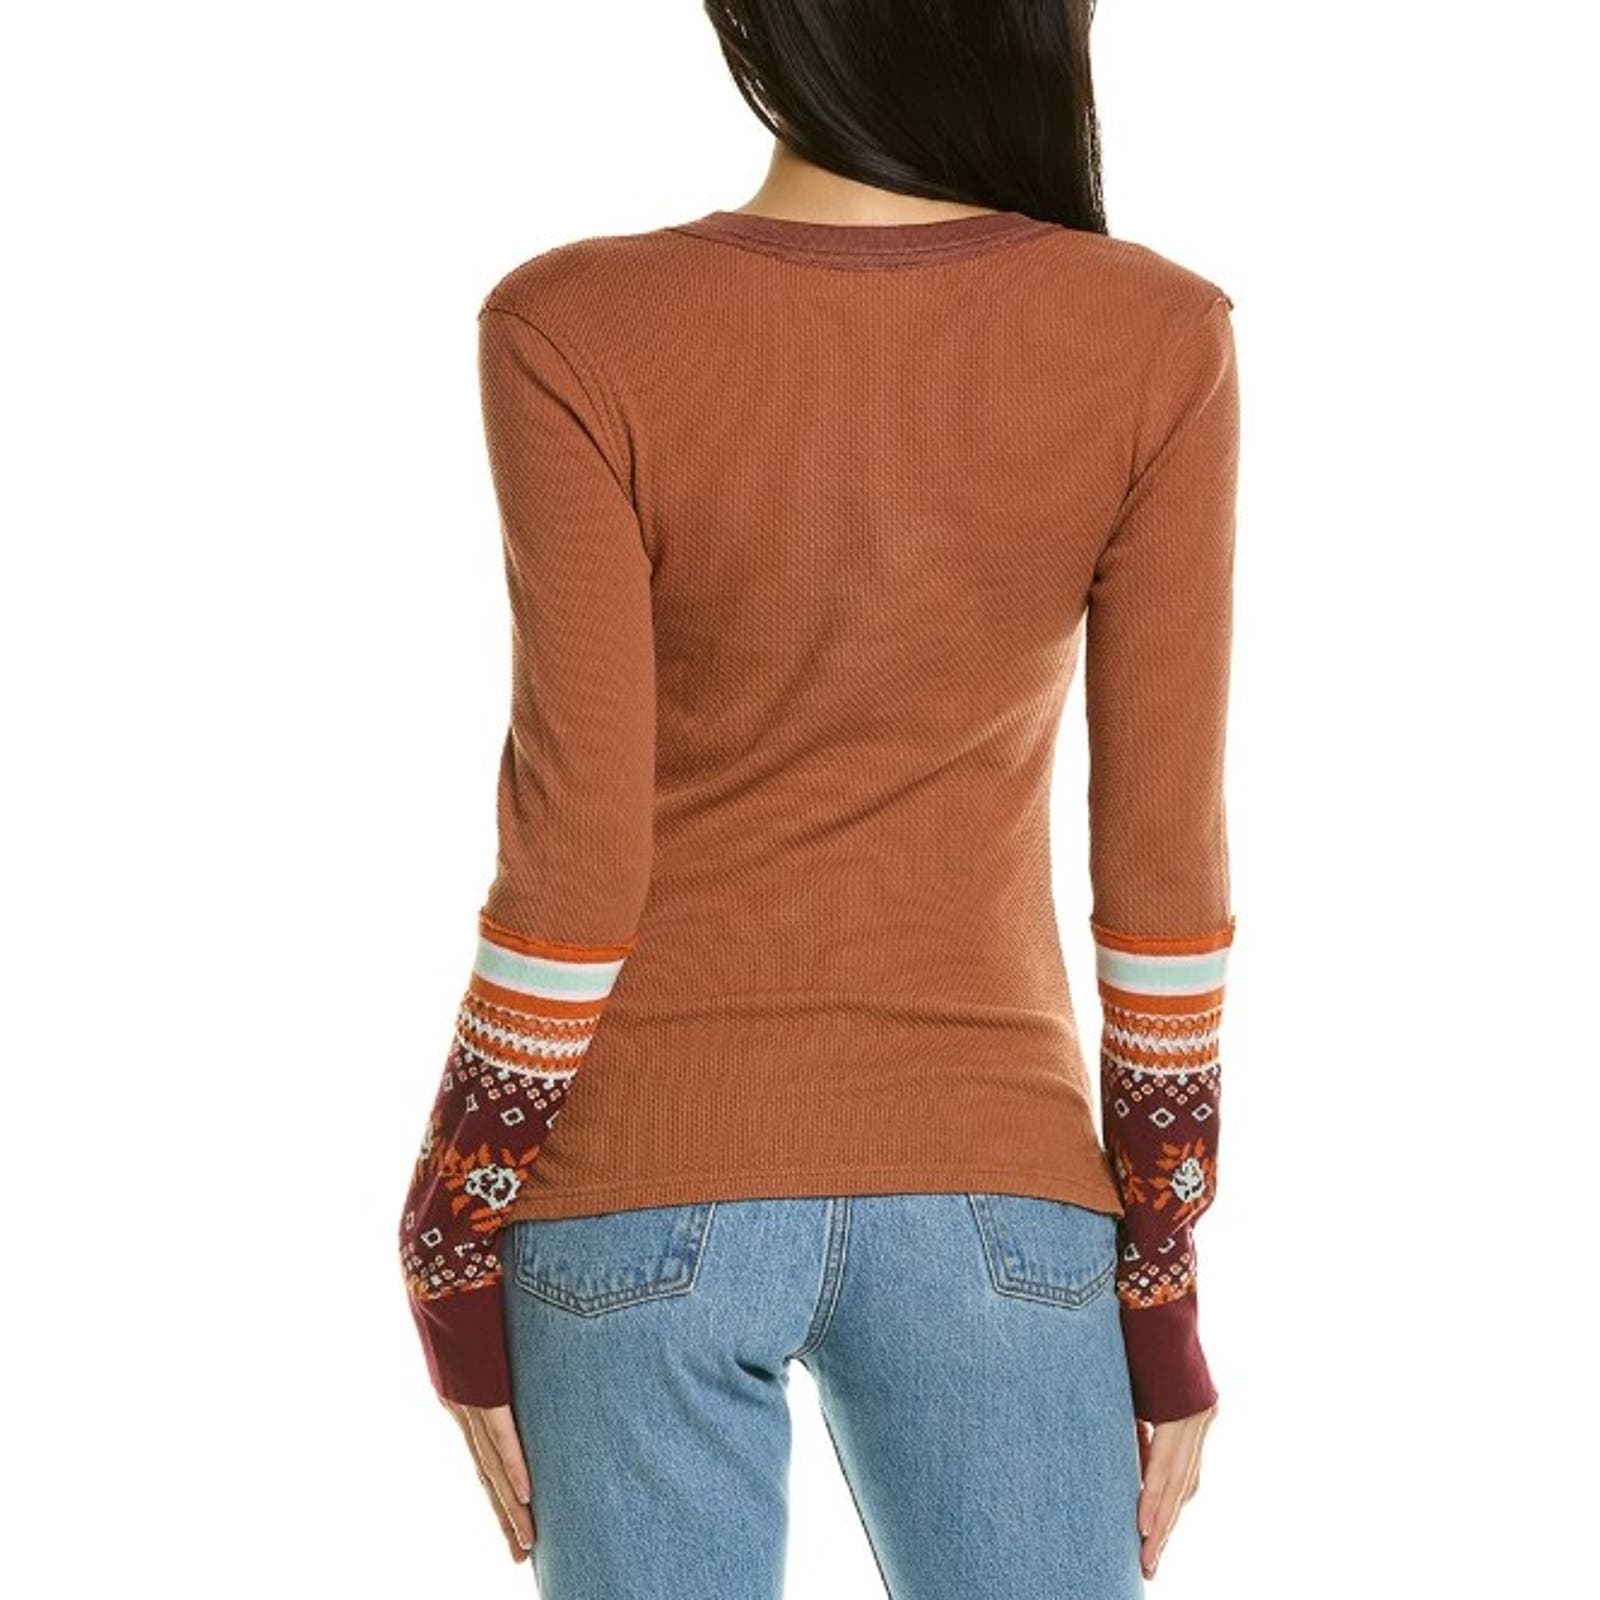 Free People NWT Mikah Layering Cuff Pullover V-Neck Knit Shirt Large OB1543742